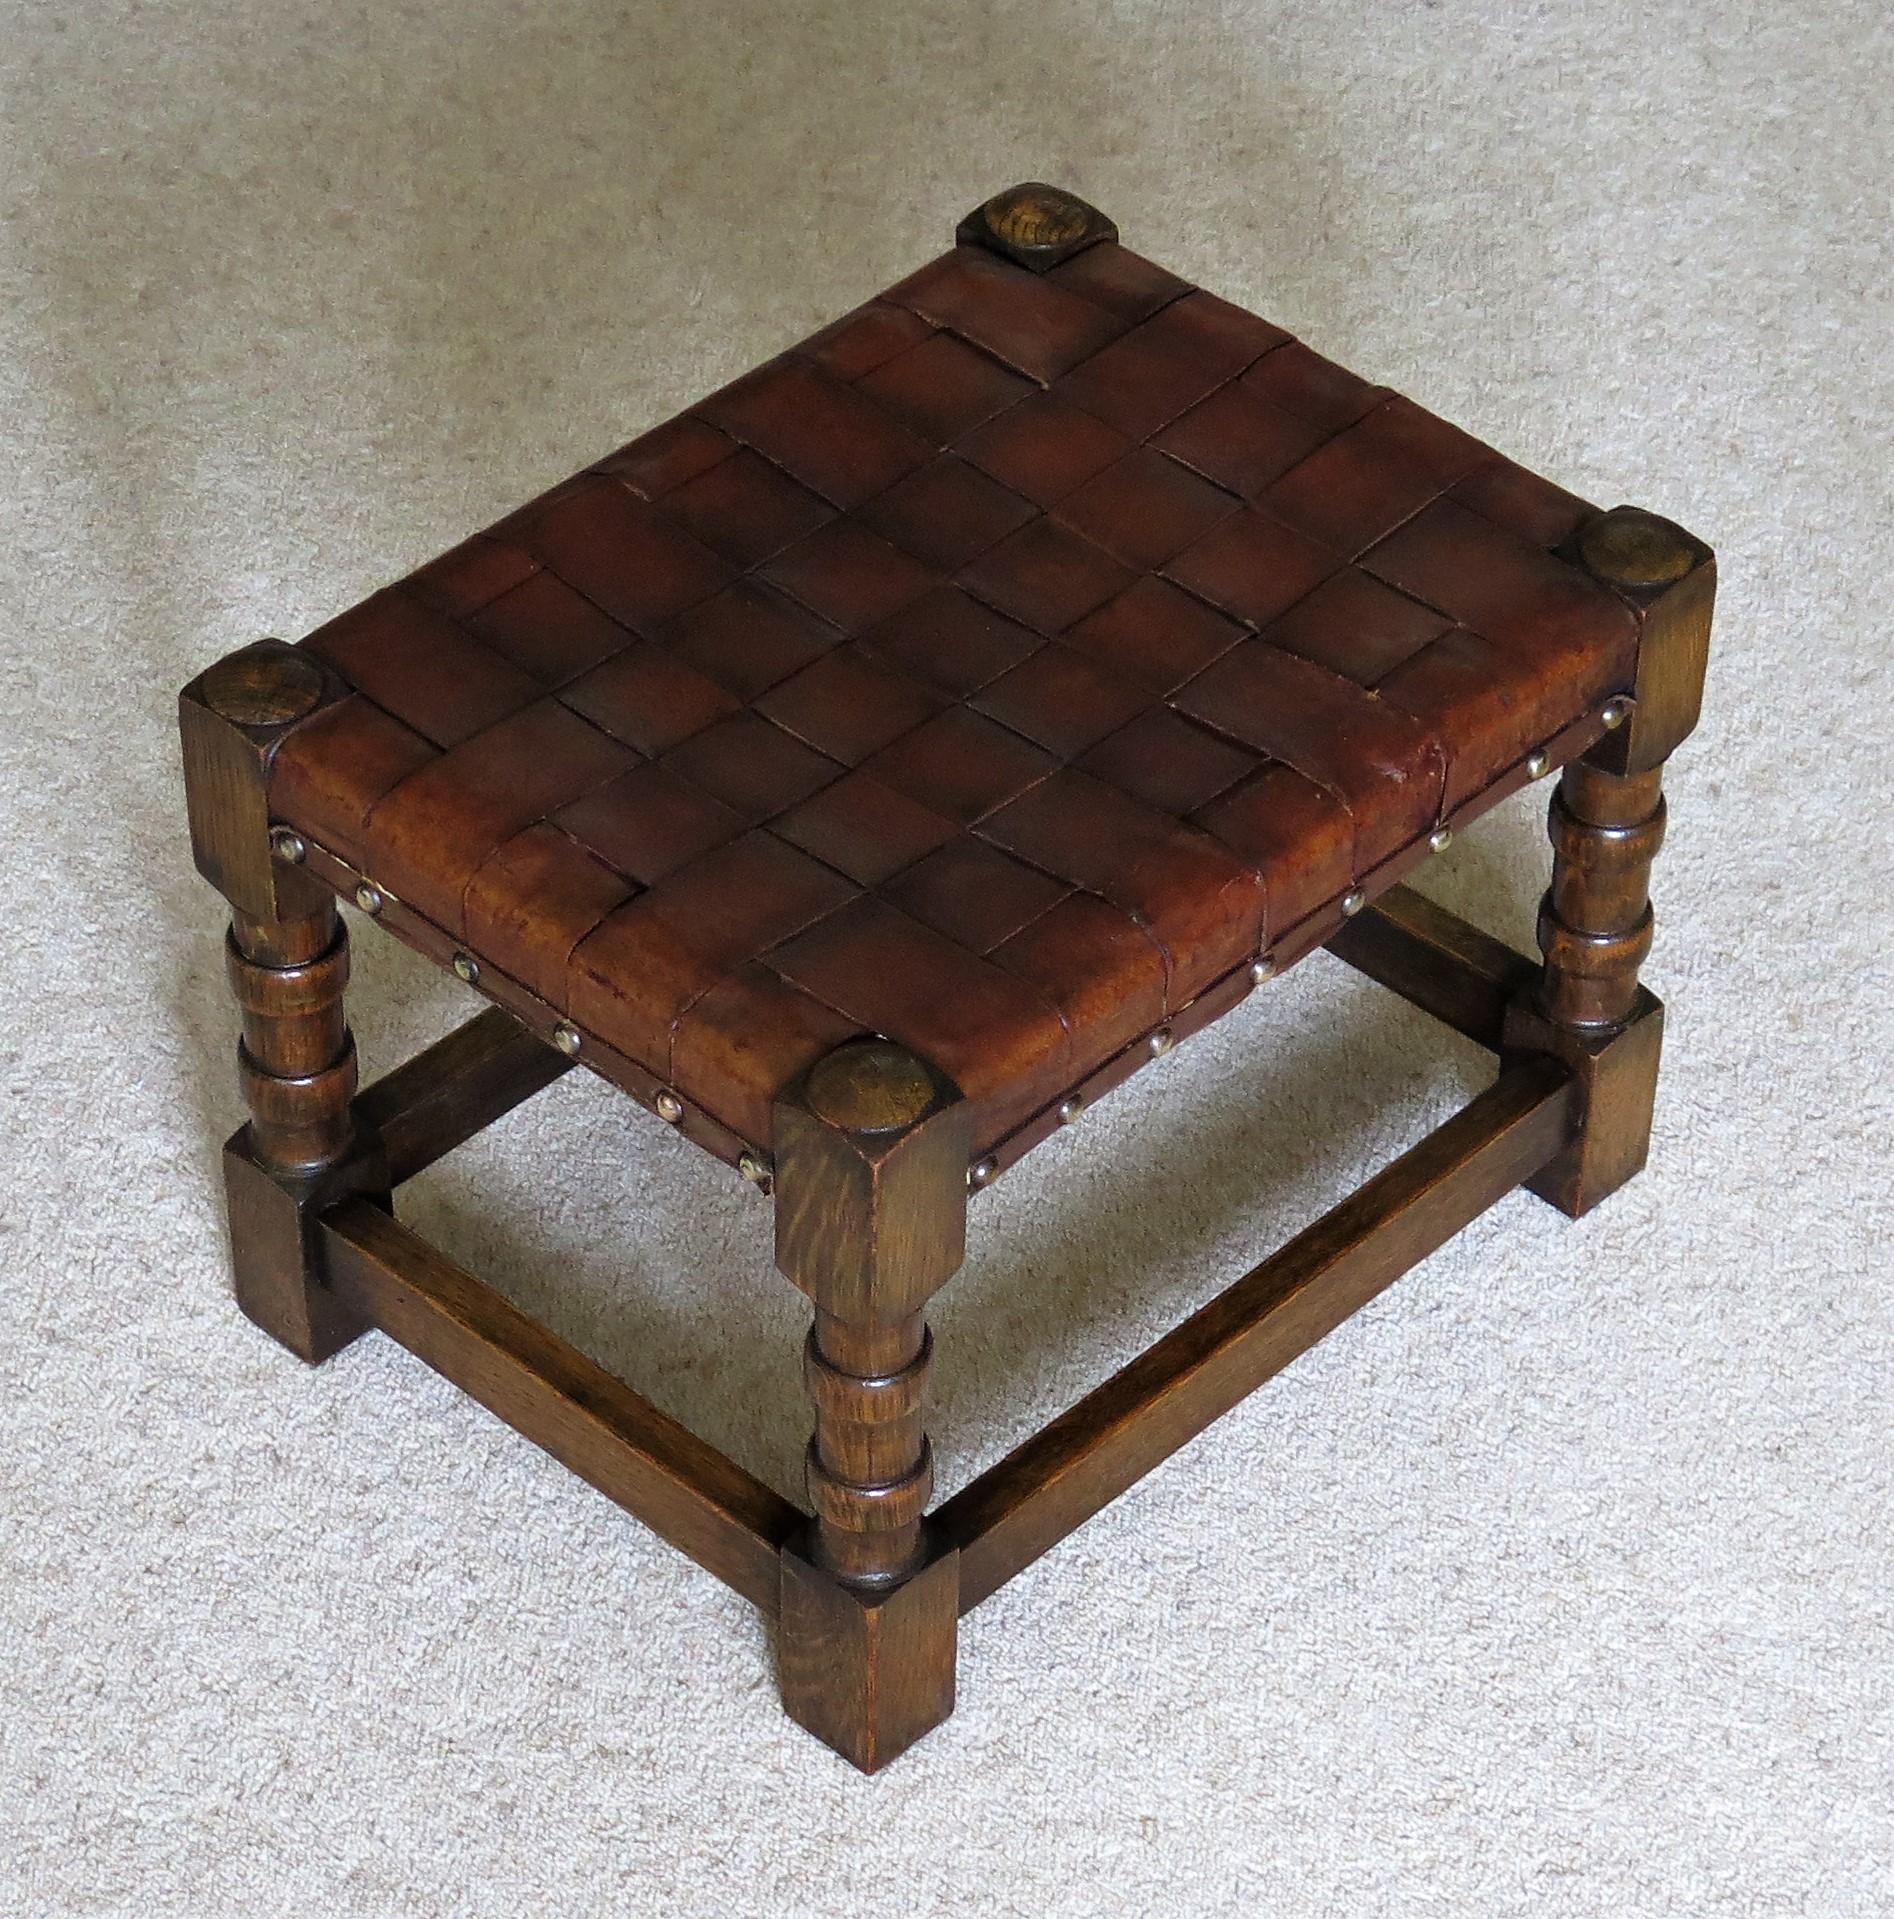 Handmade Oak Stool with Leather Strap Top, Arts & Crafts Late 19th Century For Sale 1